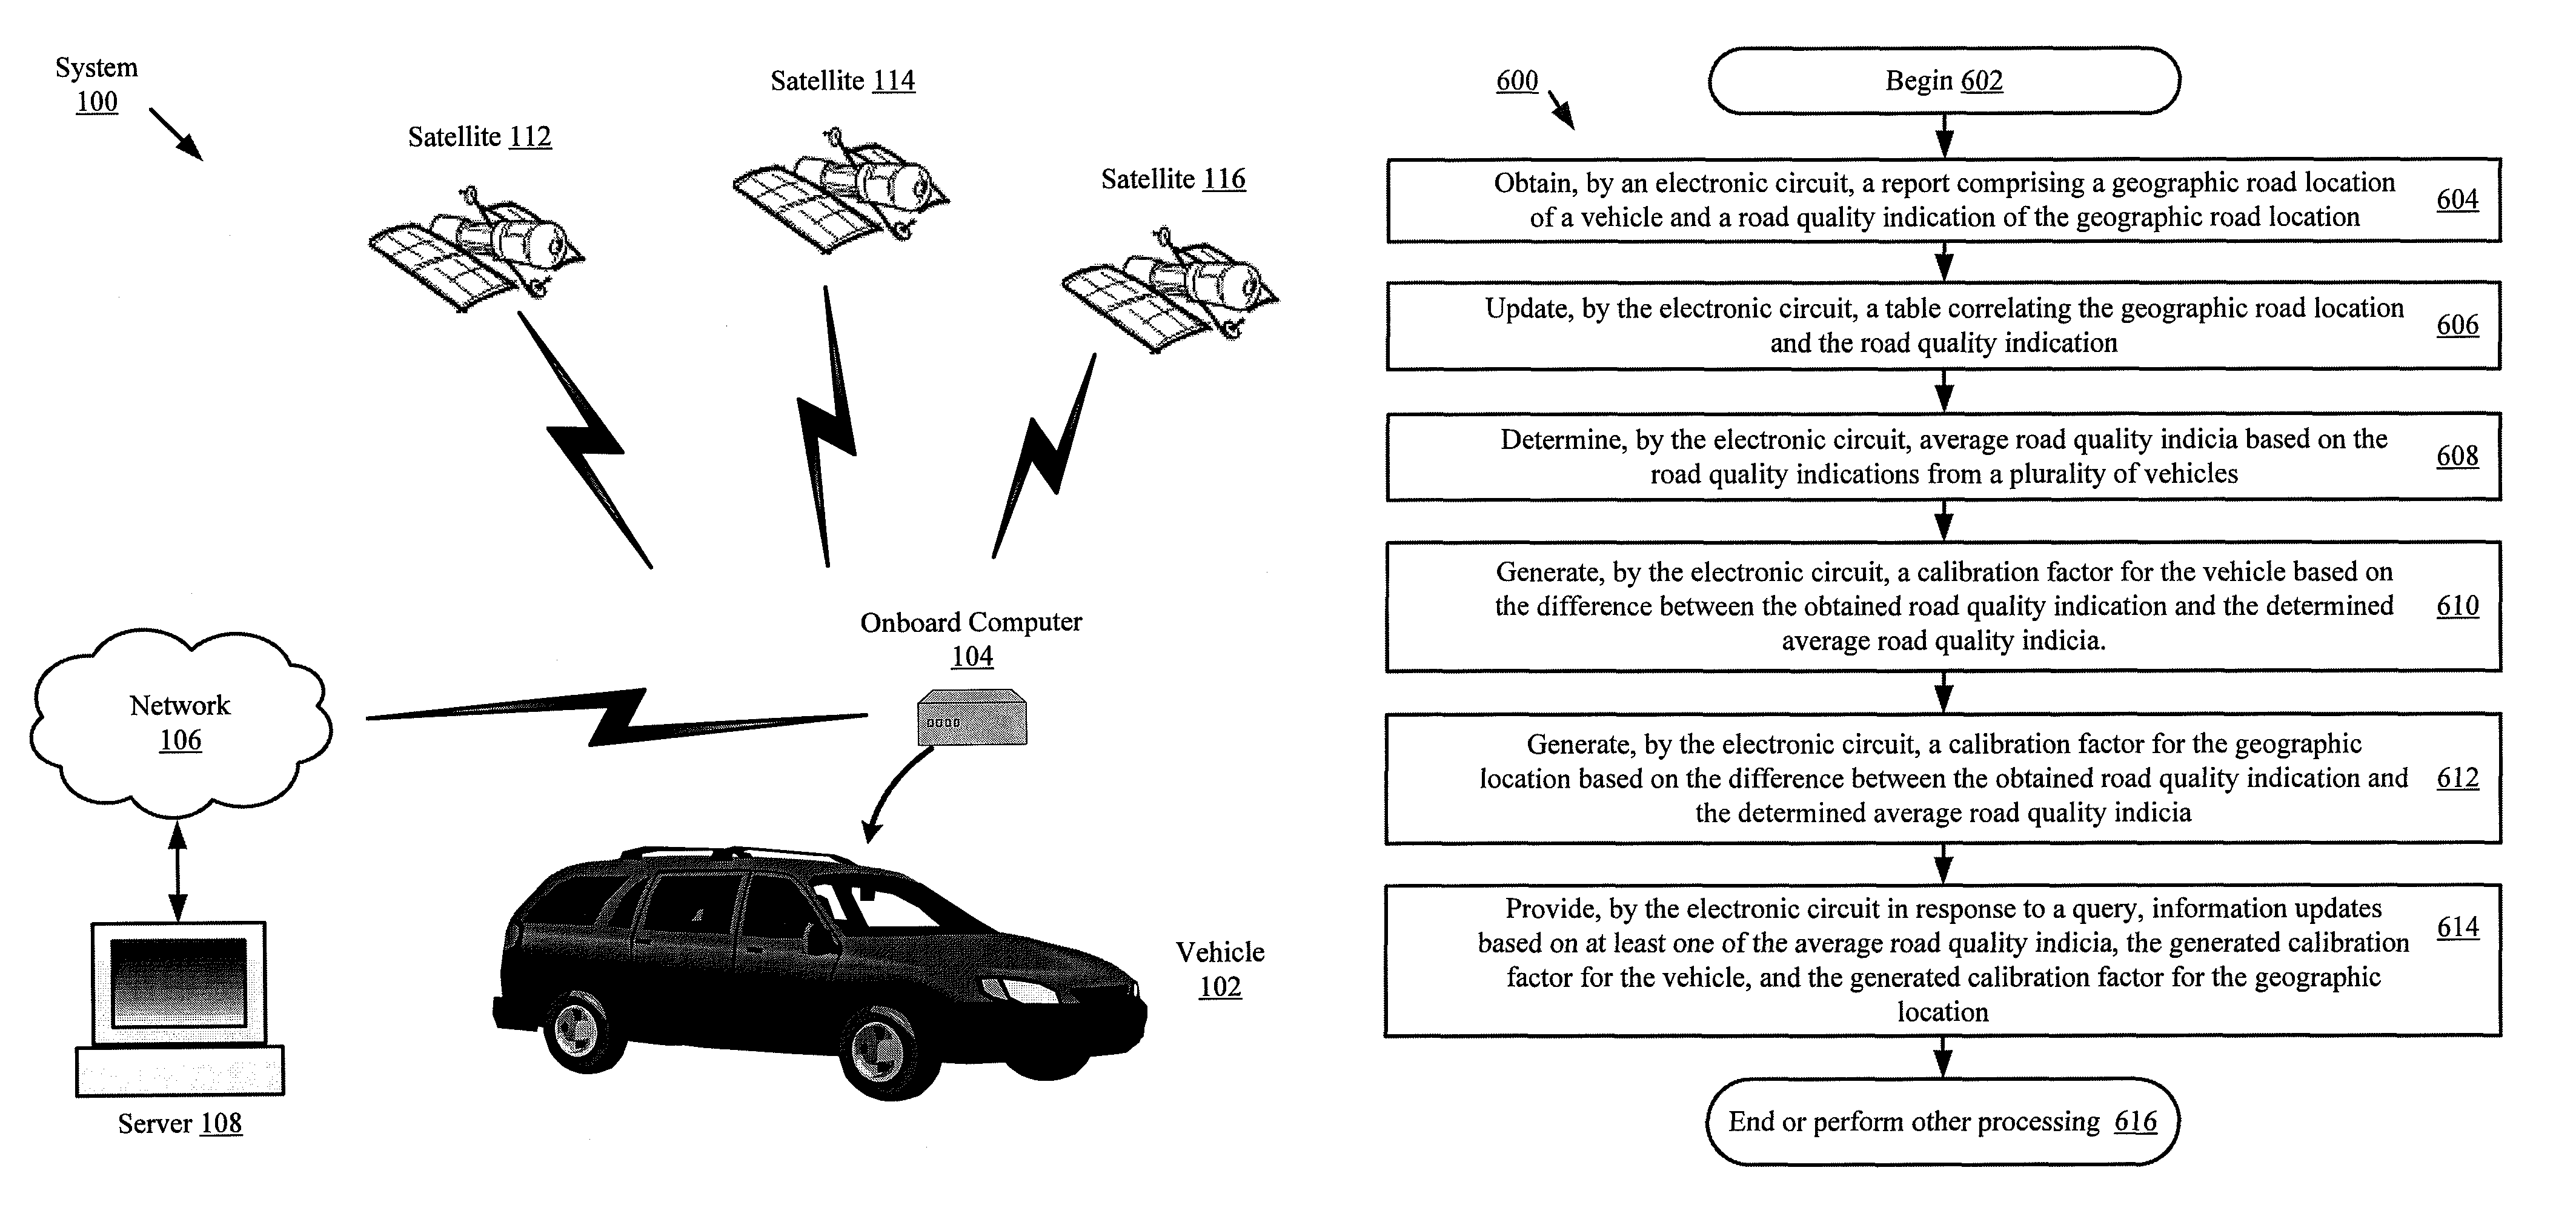 Systems and methods for monitoring and reporting road quality